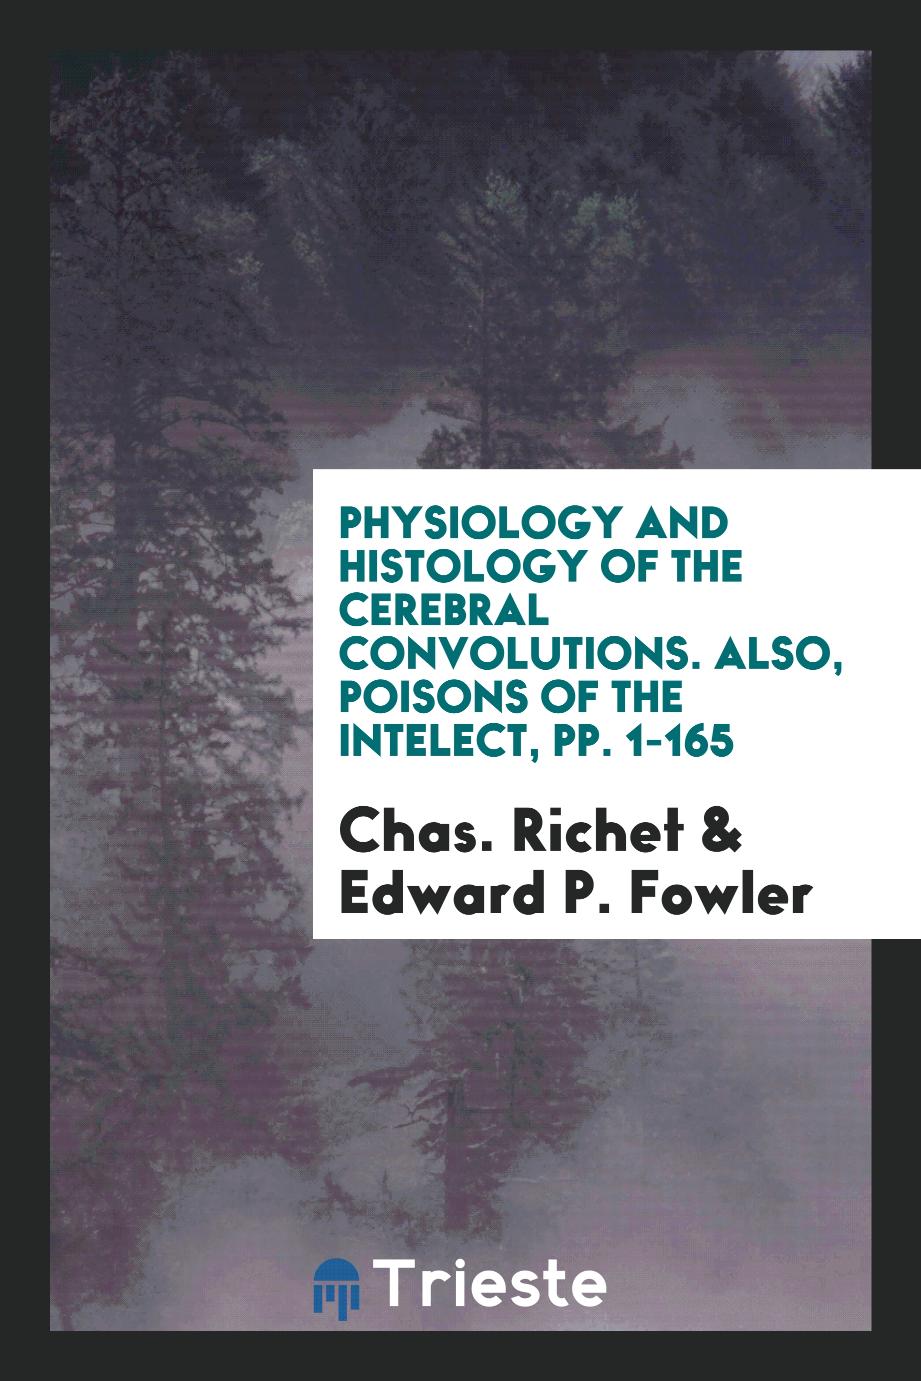 Physiology and Histology of the Cerebral Convolutions. Also, Poisons of the Intelect, pp. 1-165